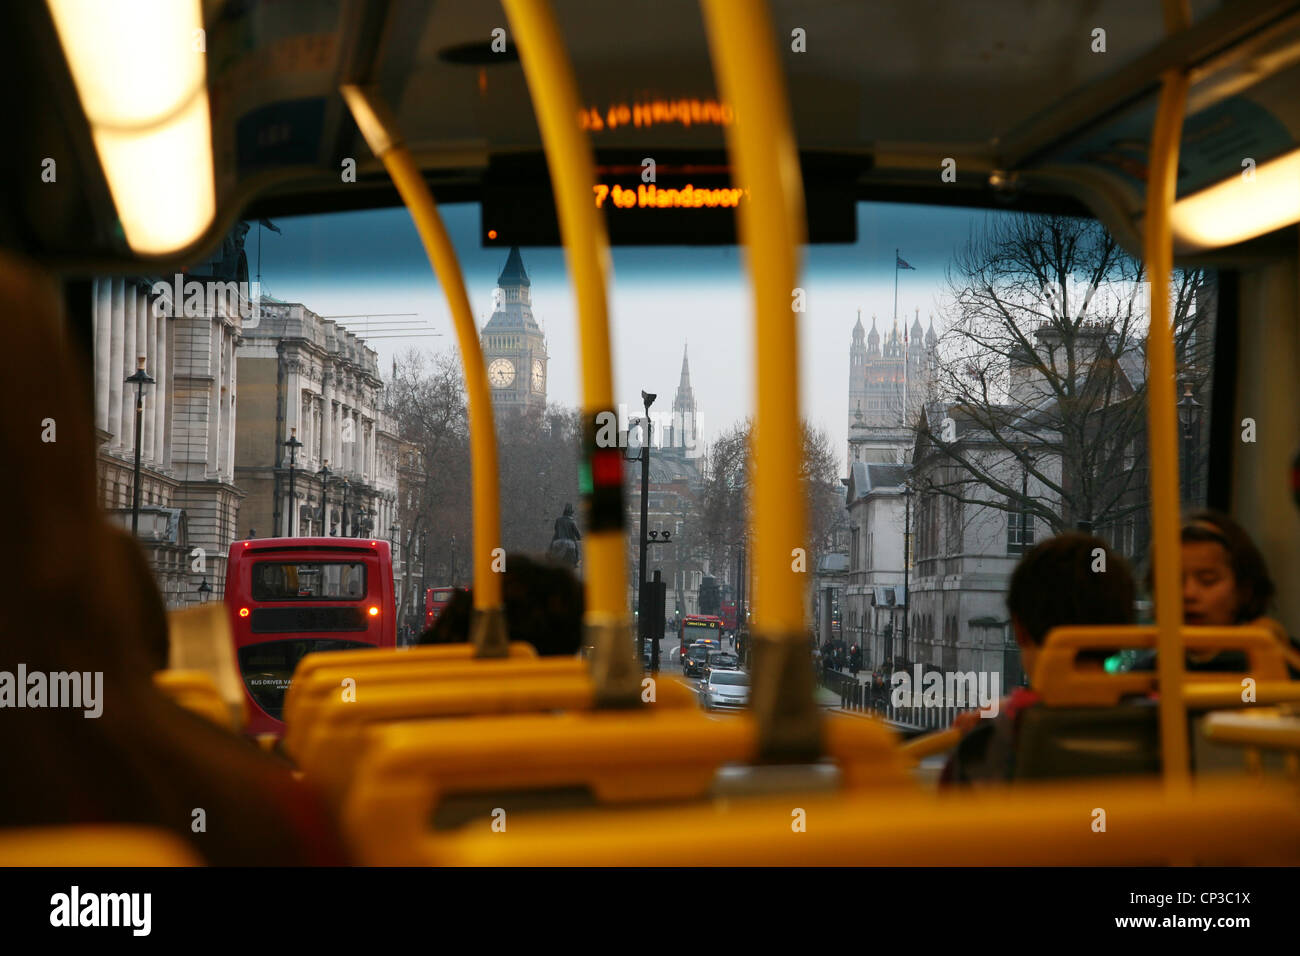 Inside view of  London Double Decker Bus, passengers are seating on upper deck [Editorial only] Stock Photo